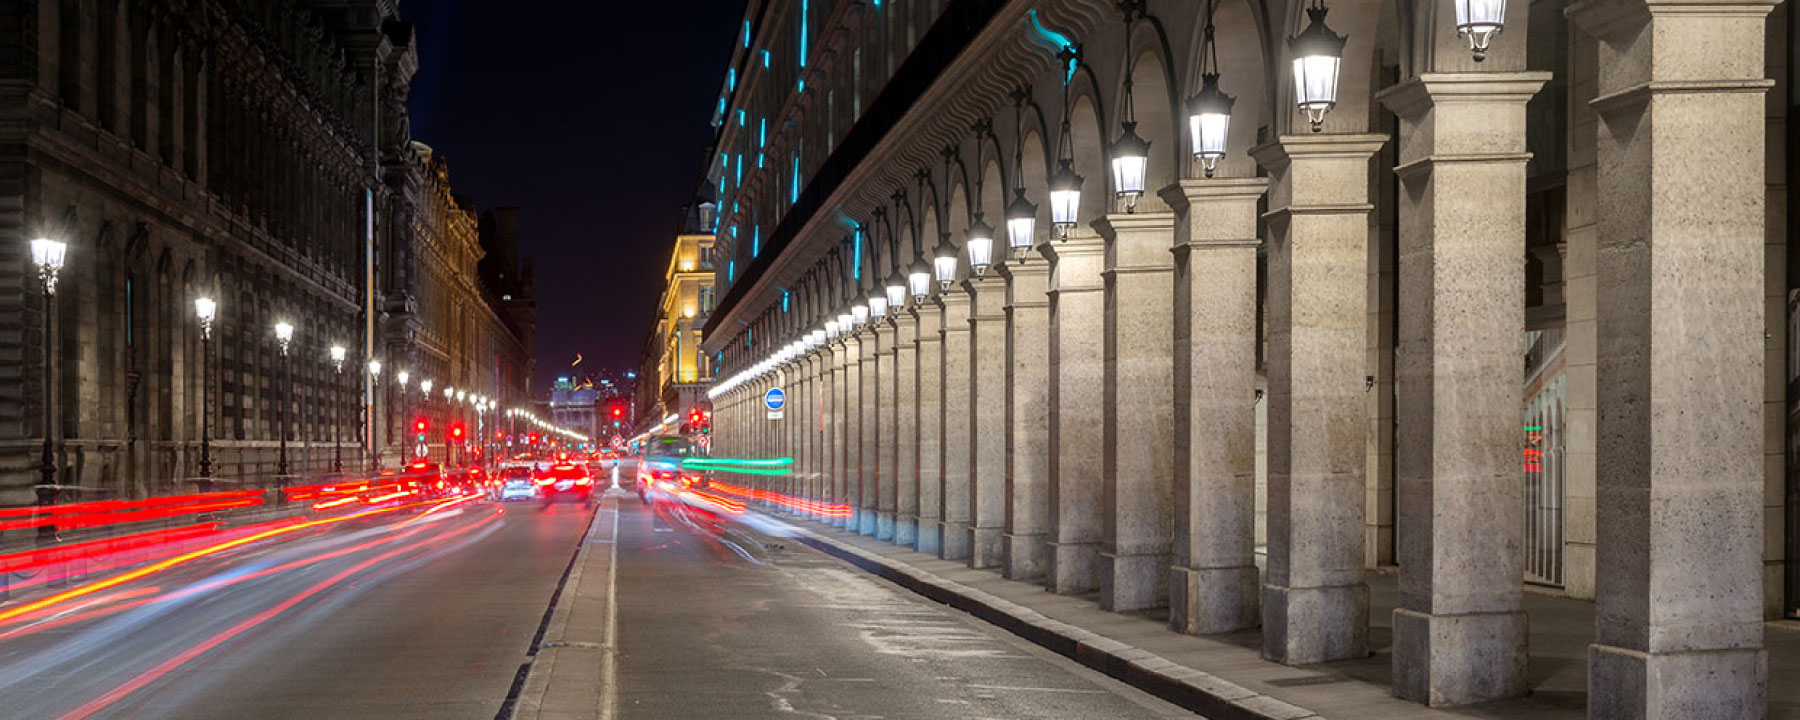 Urban lighting systems revive city centres reducing their carbon footprint